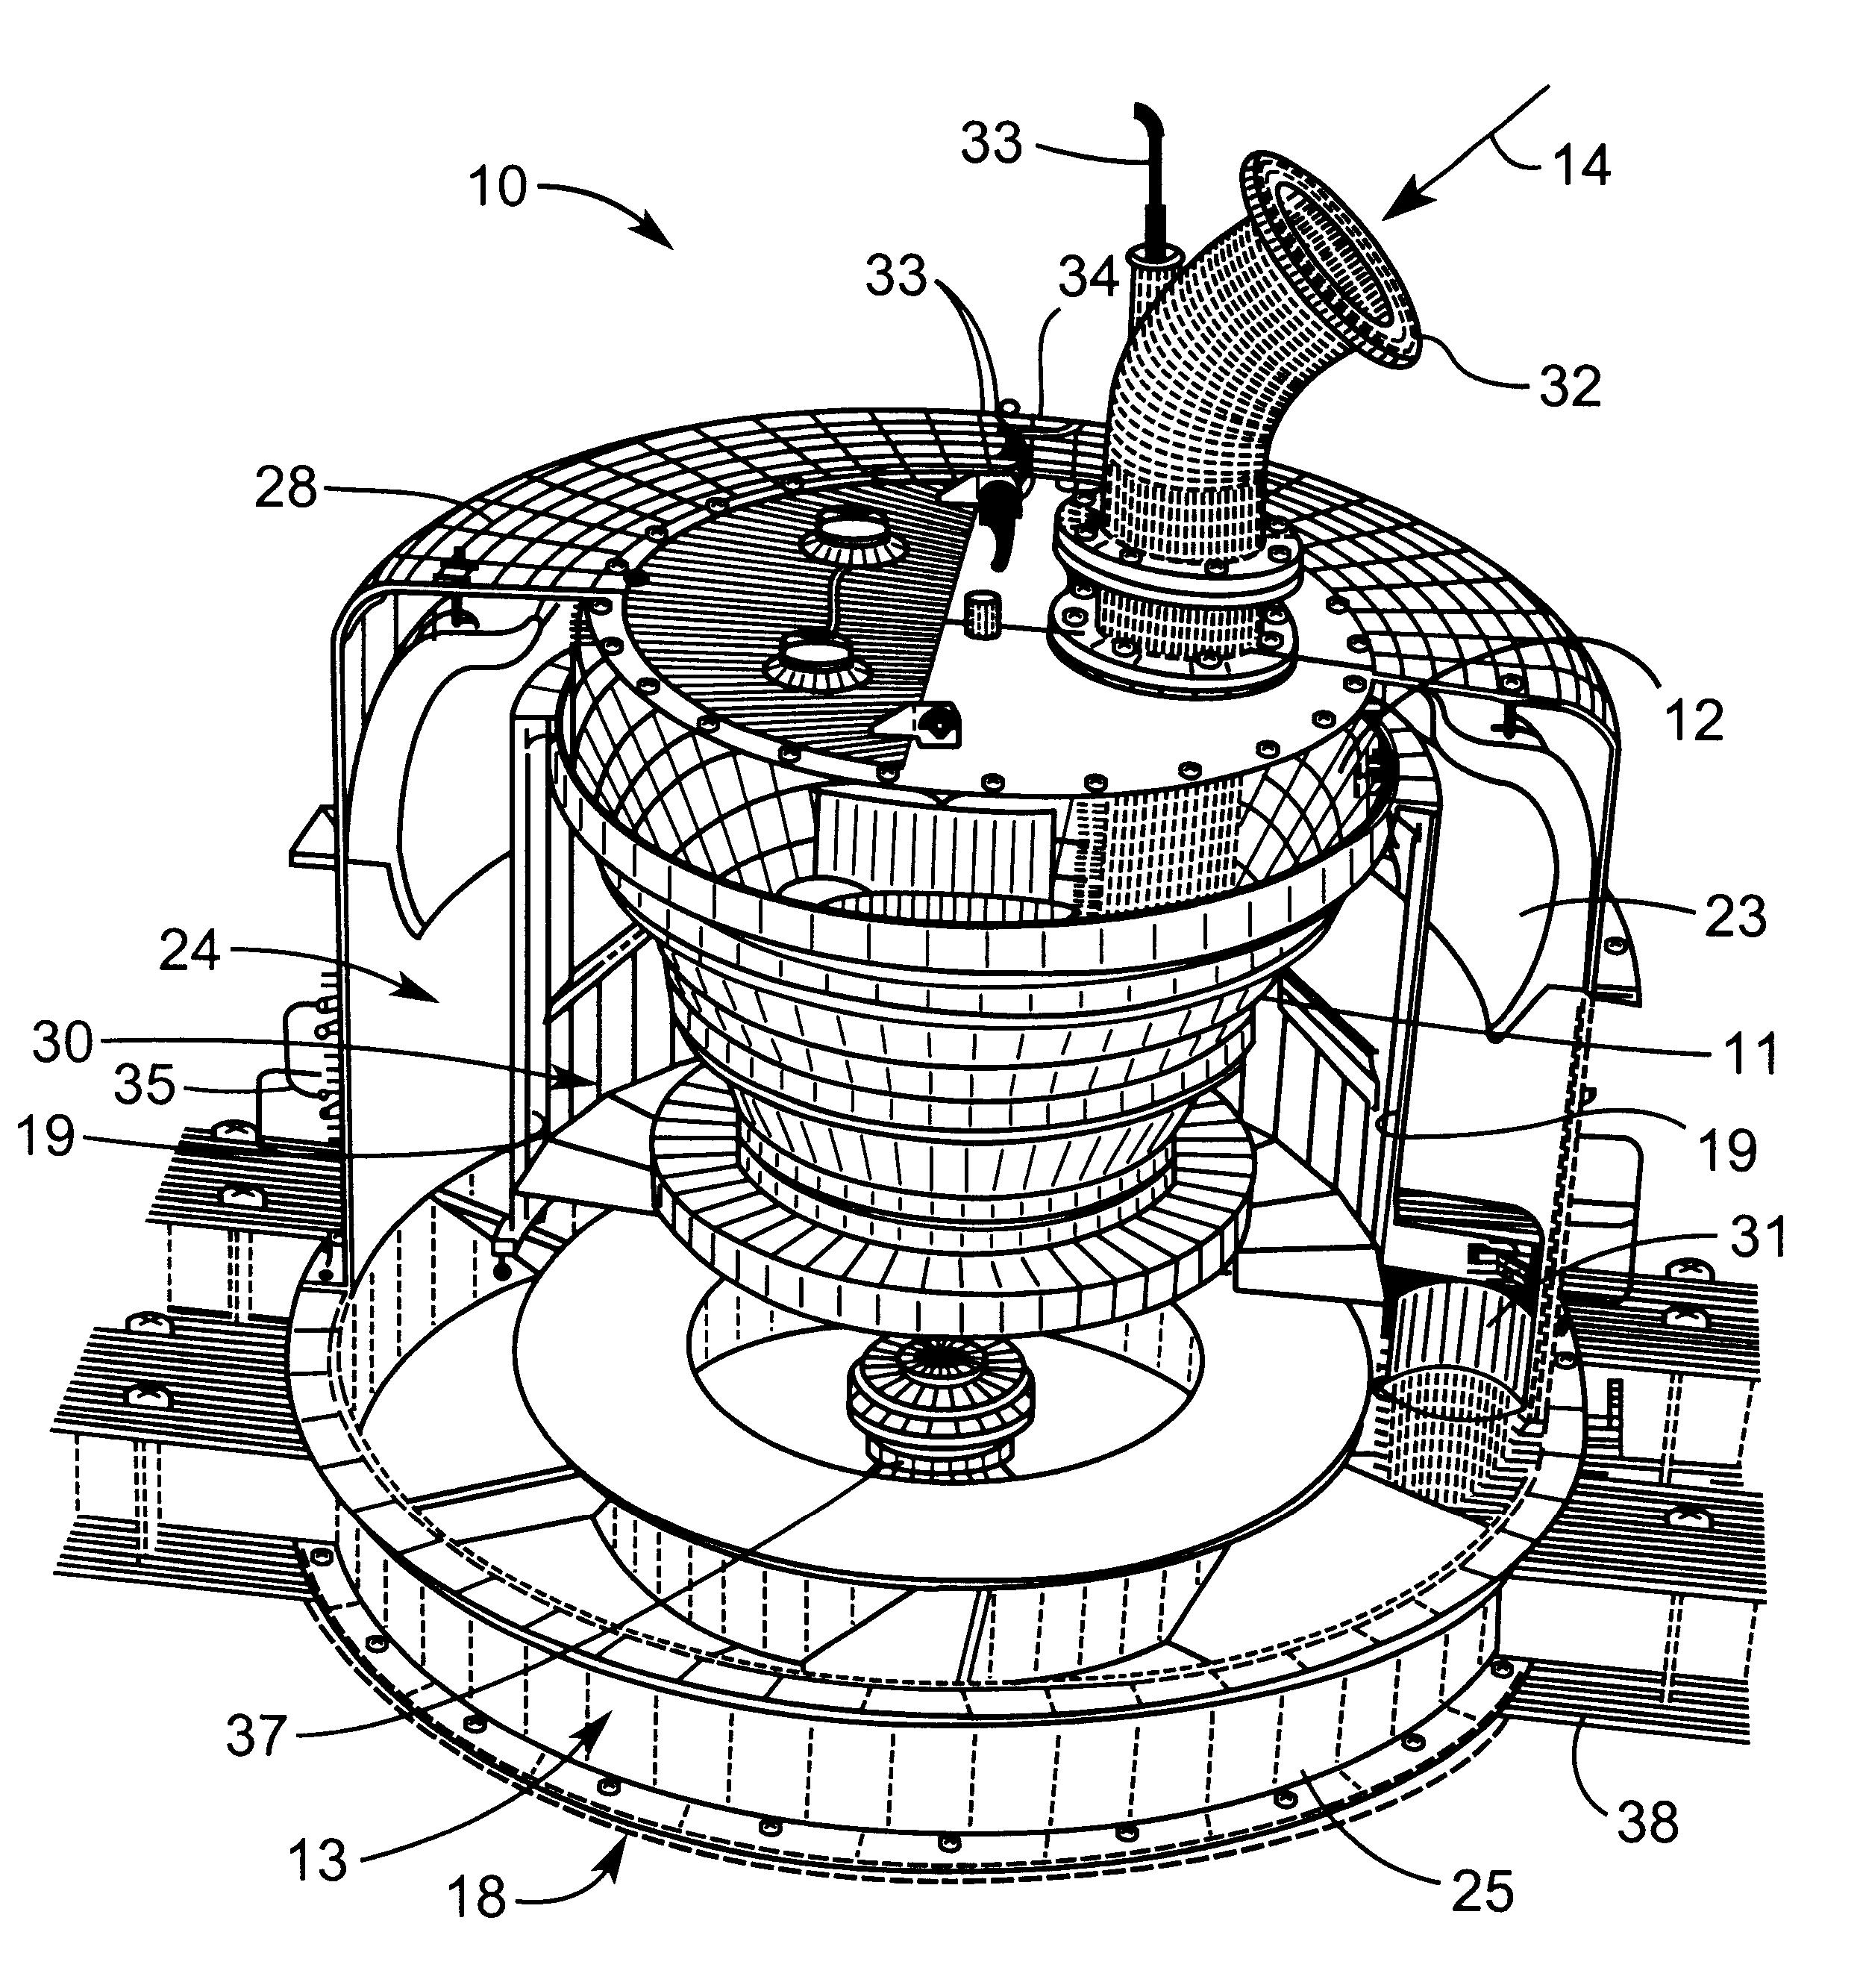 Centrifugal separation apparatus and method of using the same